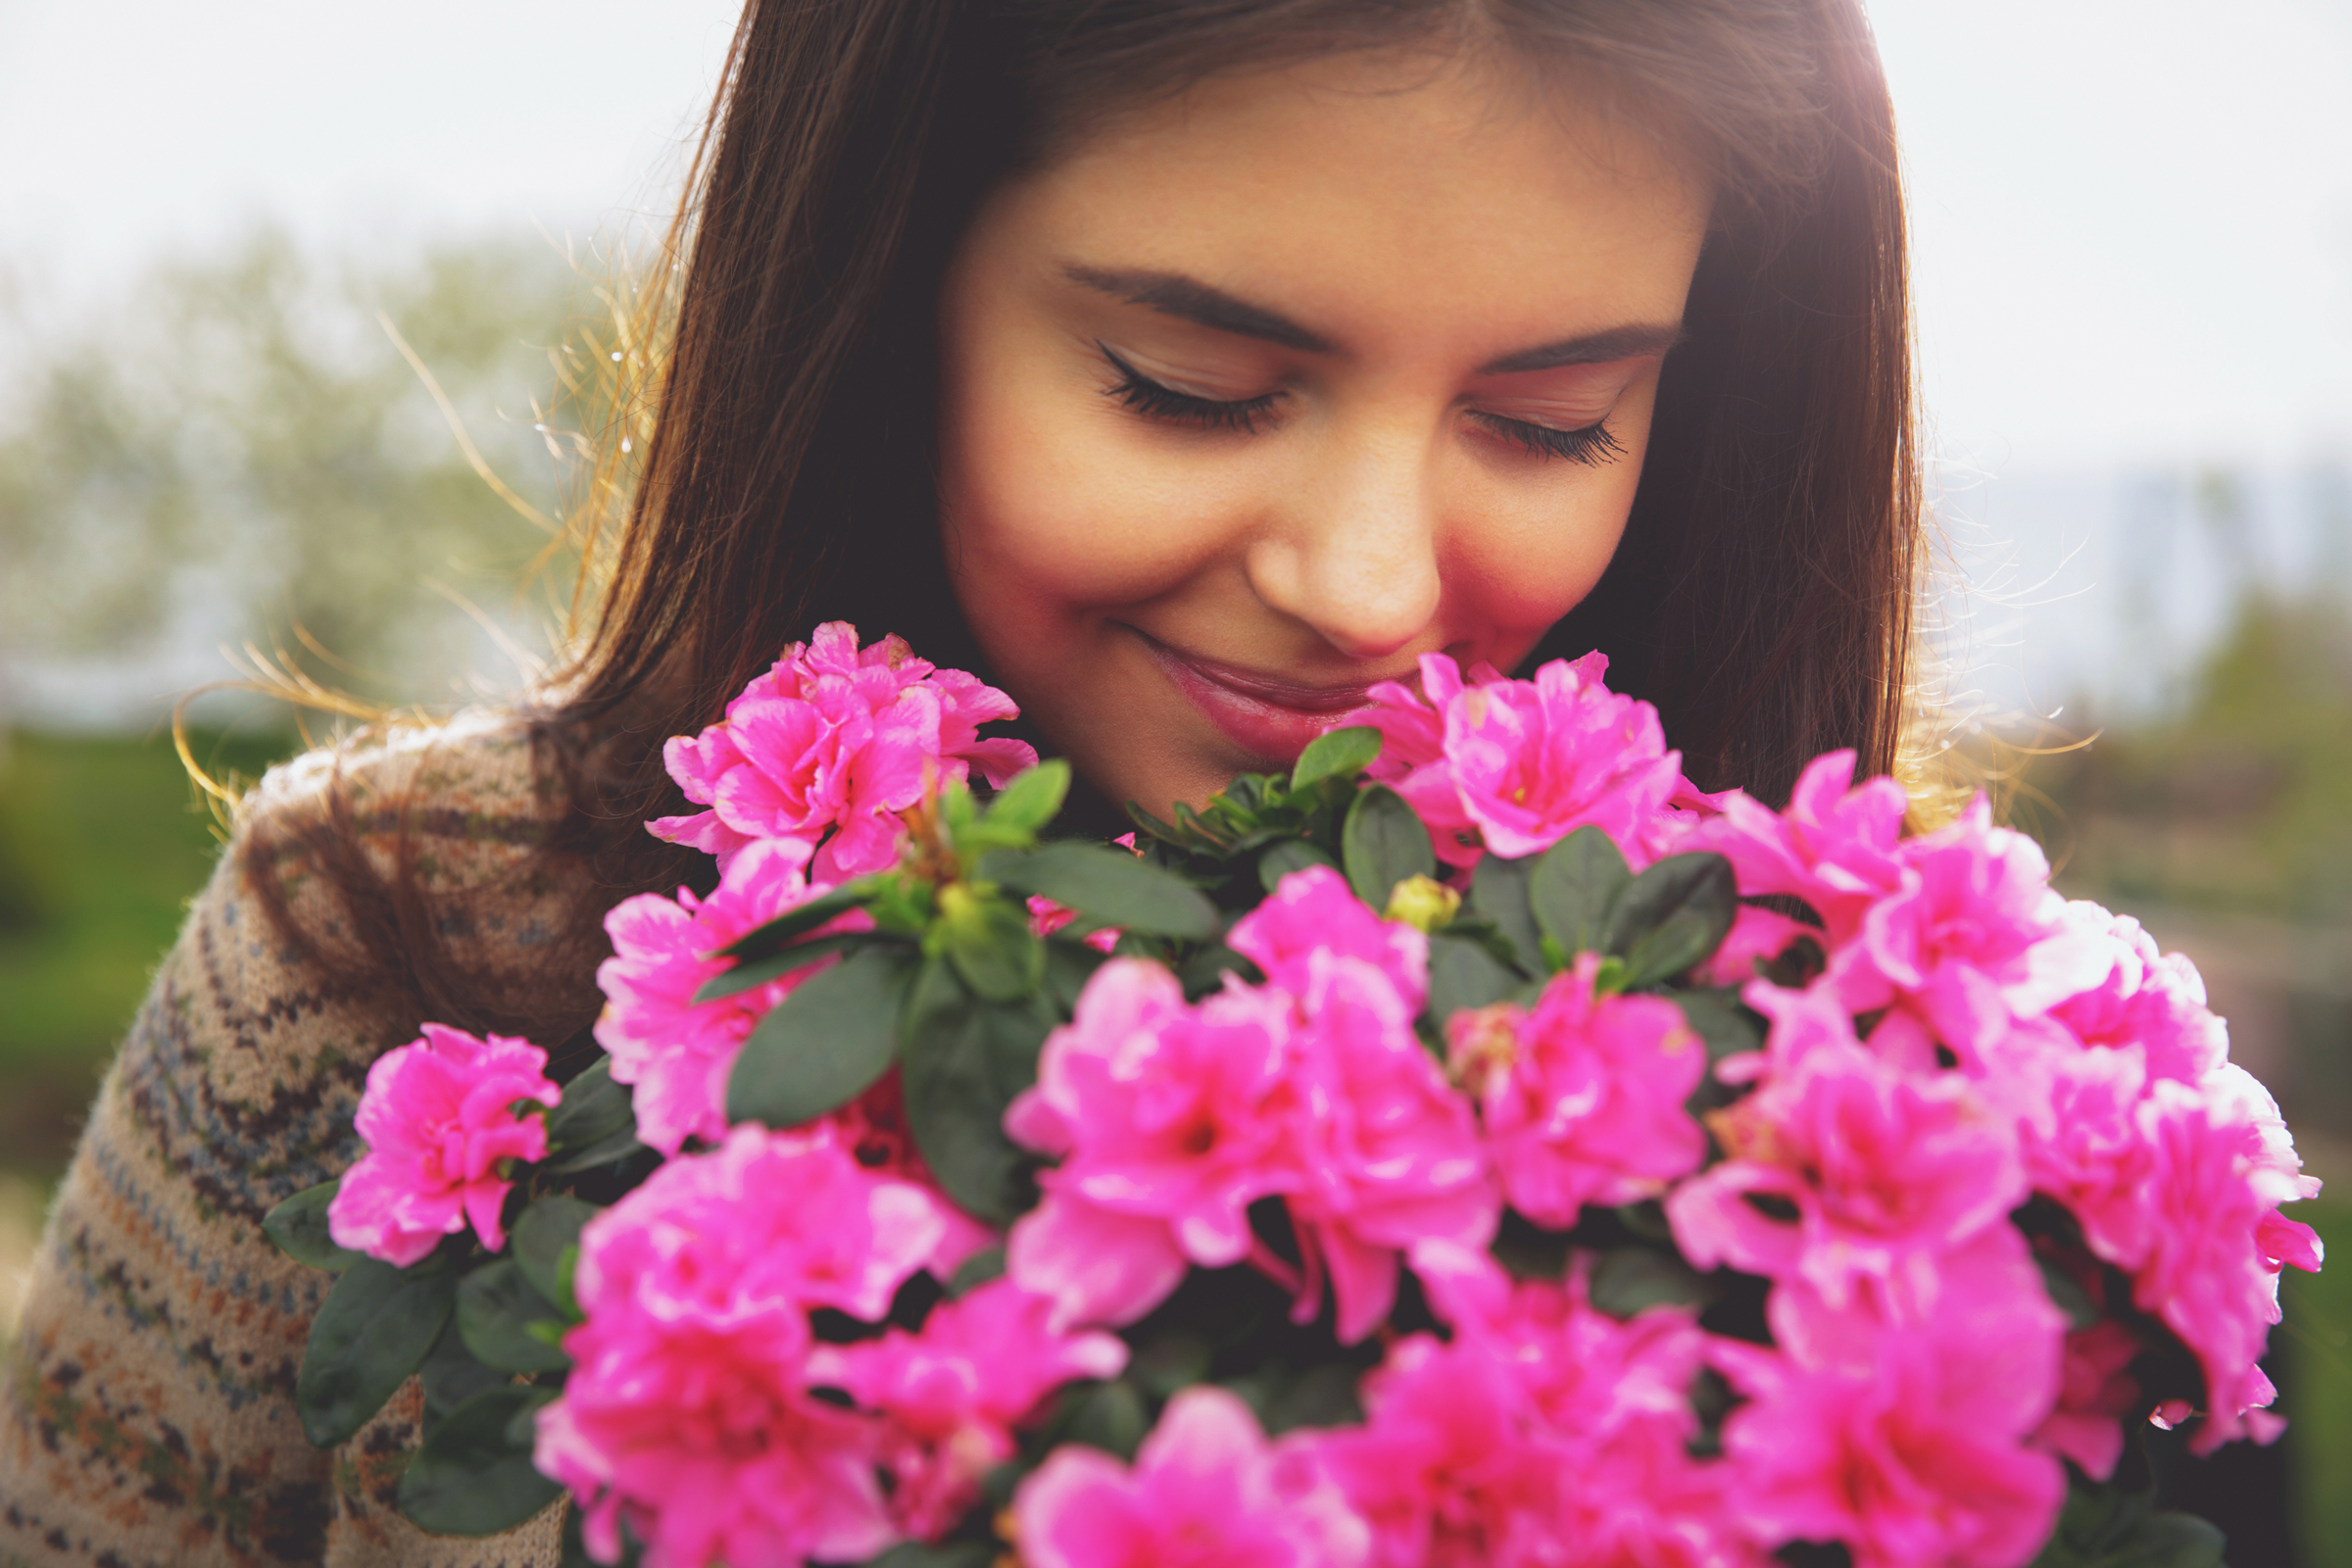 A girl holding a bouquet of flowers and smelling fresh fragnance while smiling